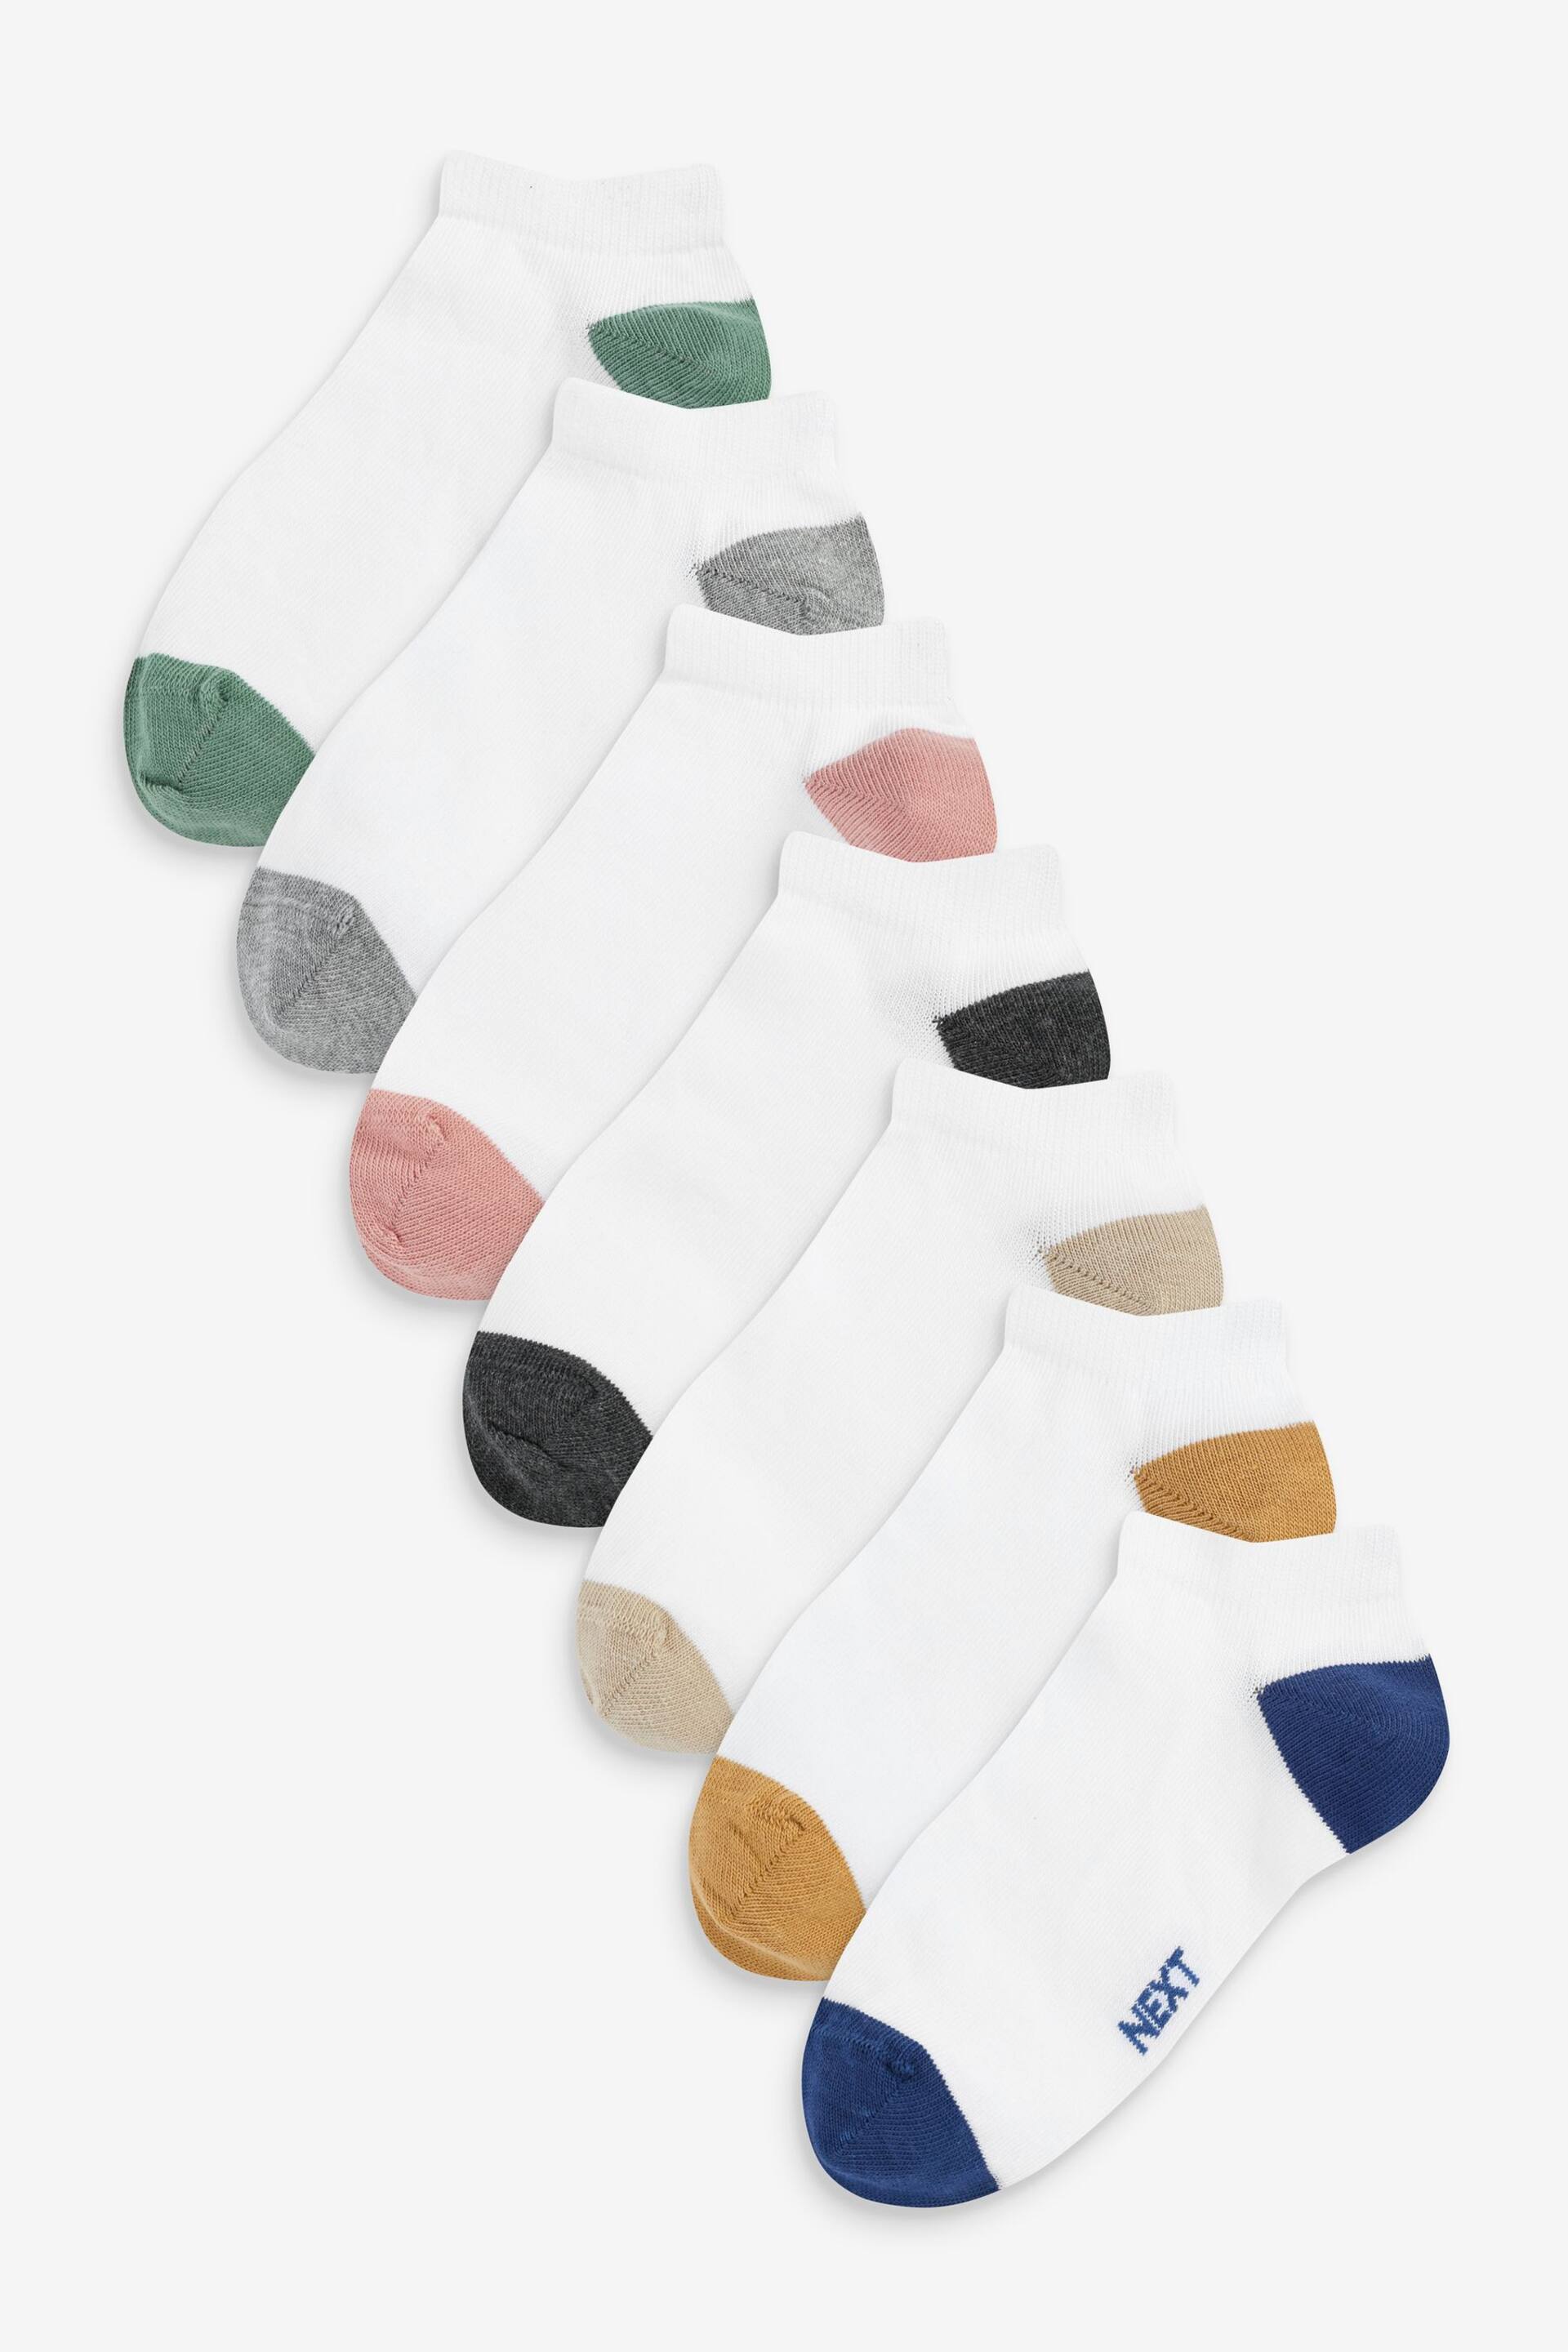 White/Bright Heel and Toe Cotton Rich Trainer Socks 7 Pack - Image 1 of 1